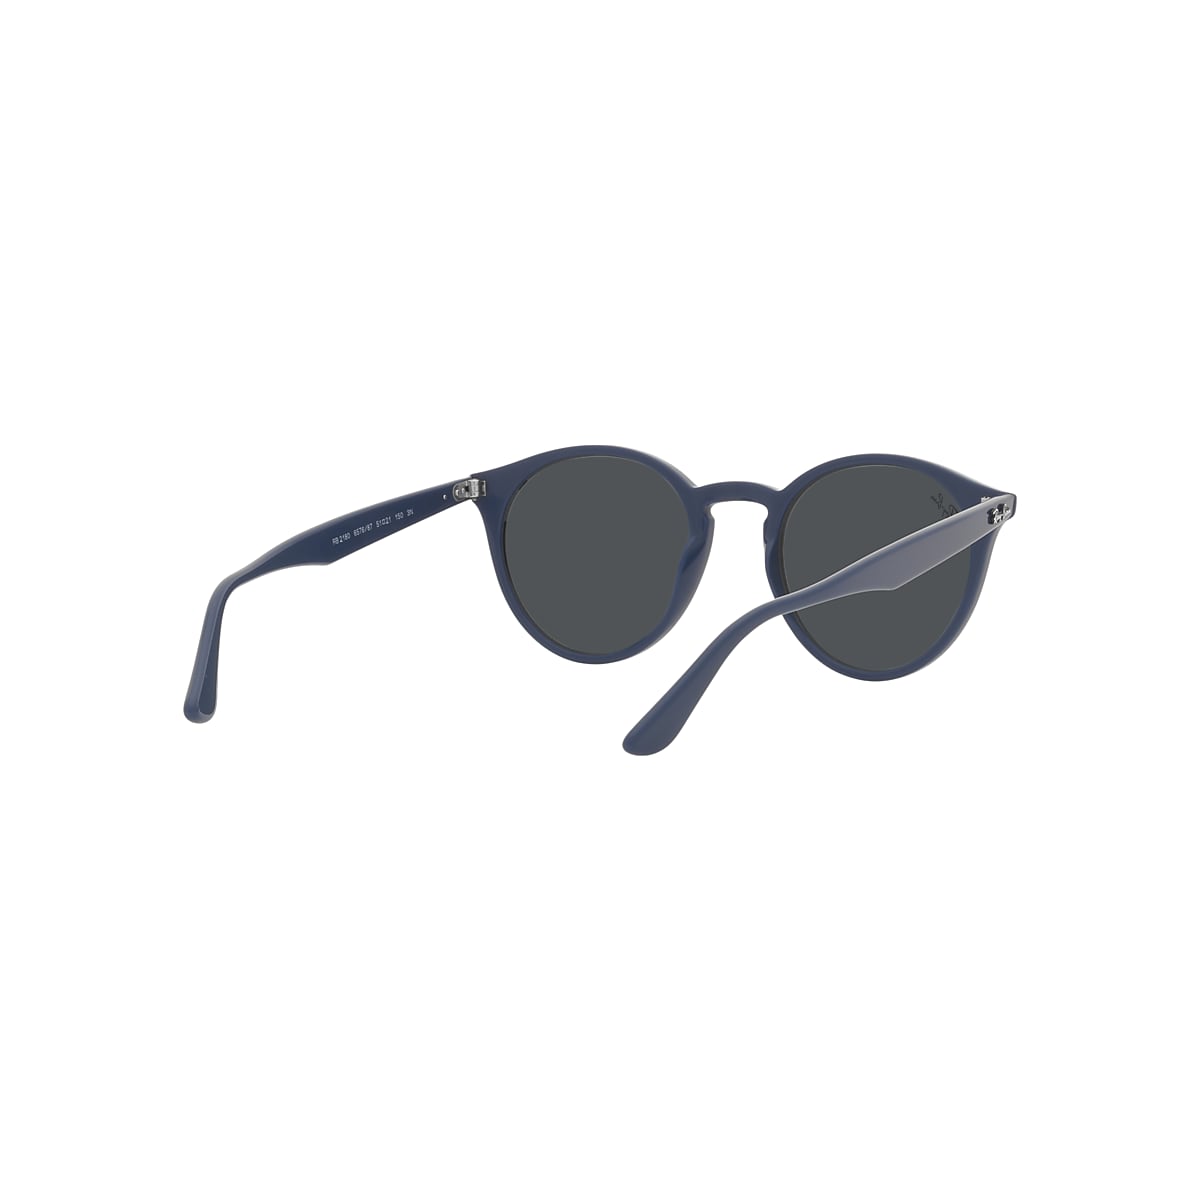 Rb2180 Sunglasses in Blue and Dark Grey - RB2180F | Ray-Ban® US